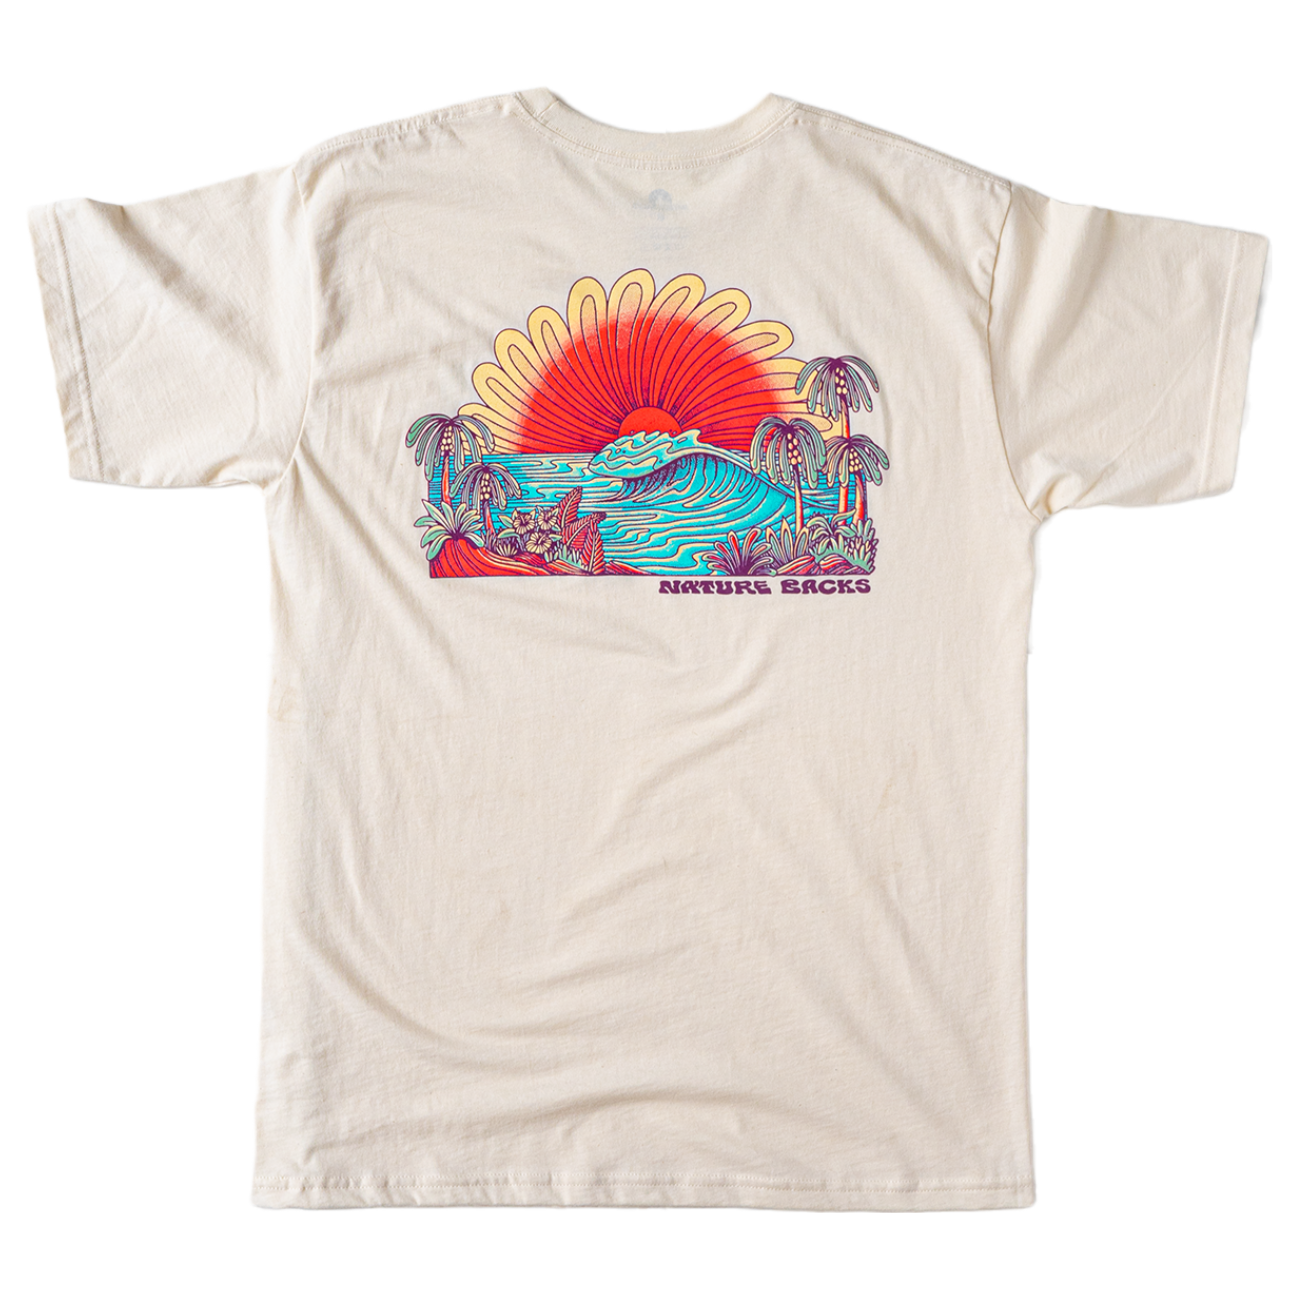 Nature Backs Limited Edition Short Sleeve 100% Organic Cotton T-Shirt | Limited Swell Natural Short Sleeve made with Eco-Friendly Fibers Sustainably made in the USA 